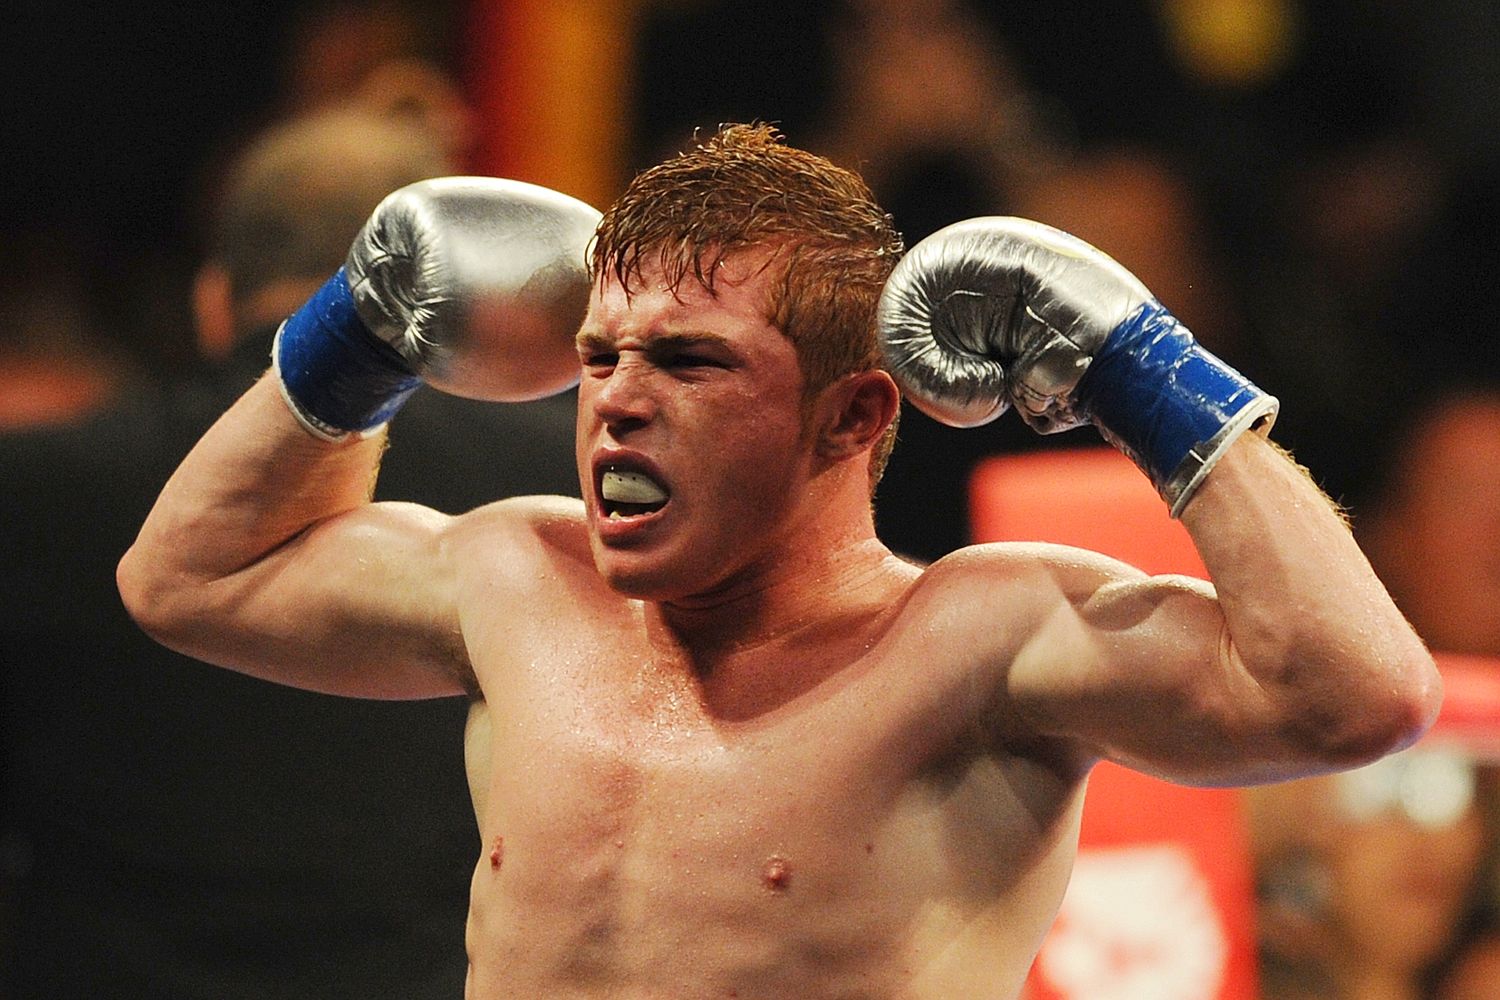 The WBA will wait for new studies before pronouncing on Canelo case